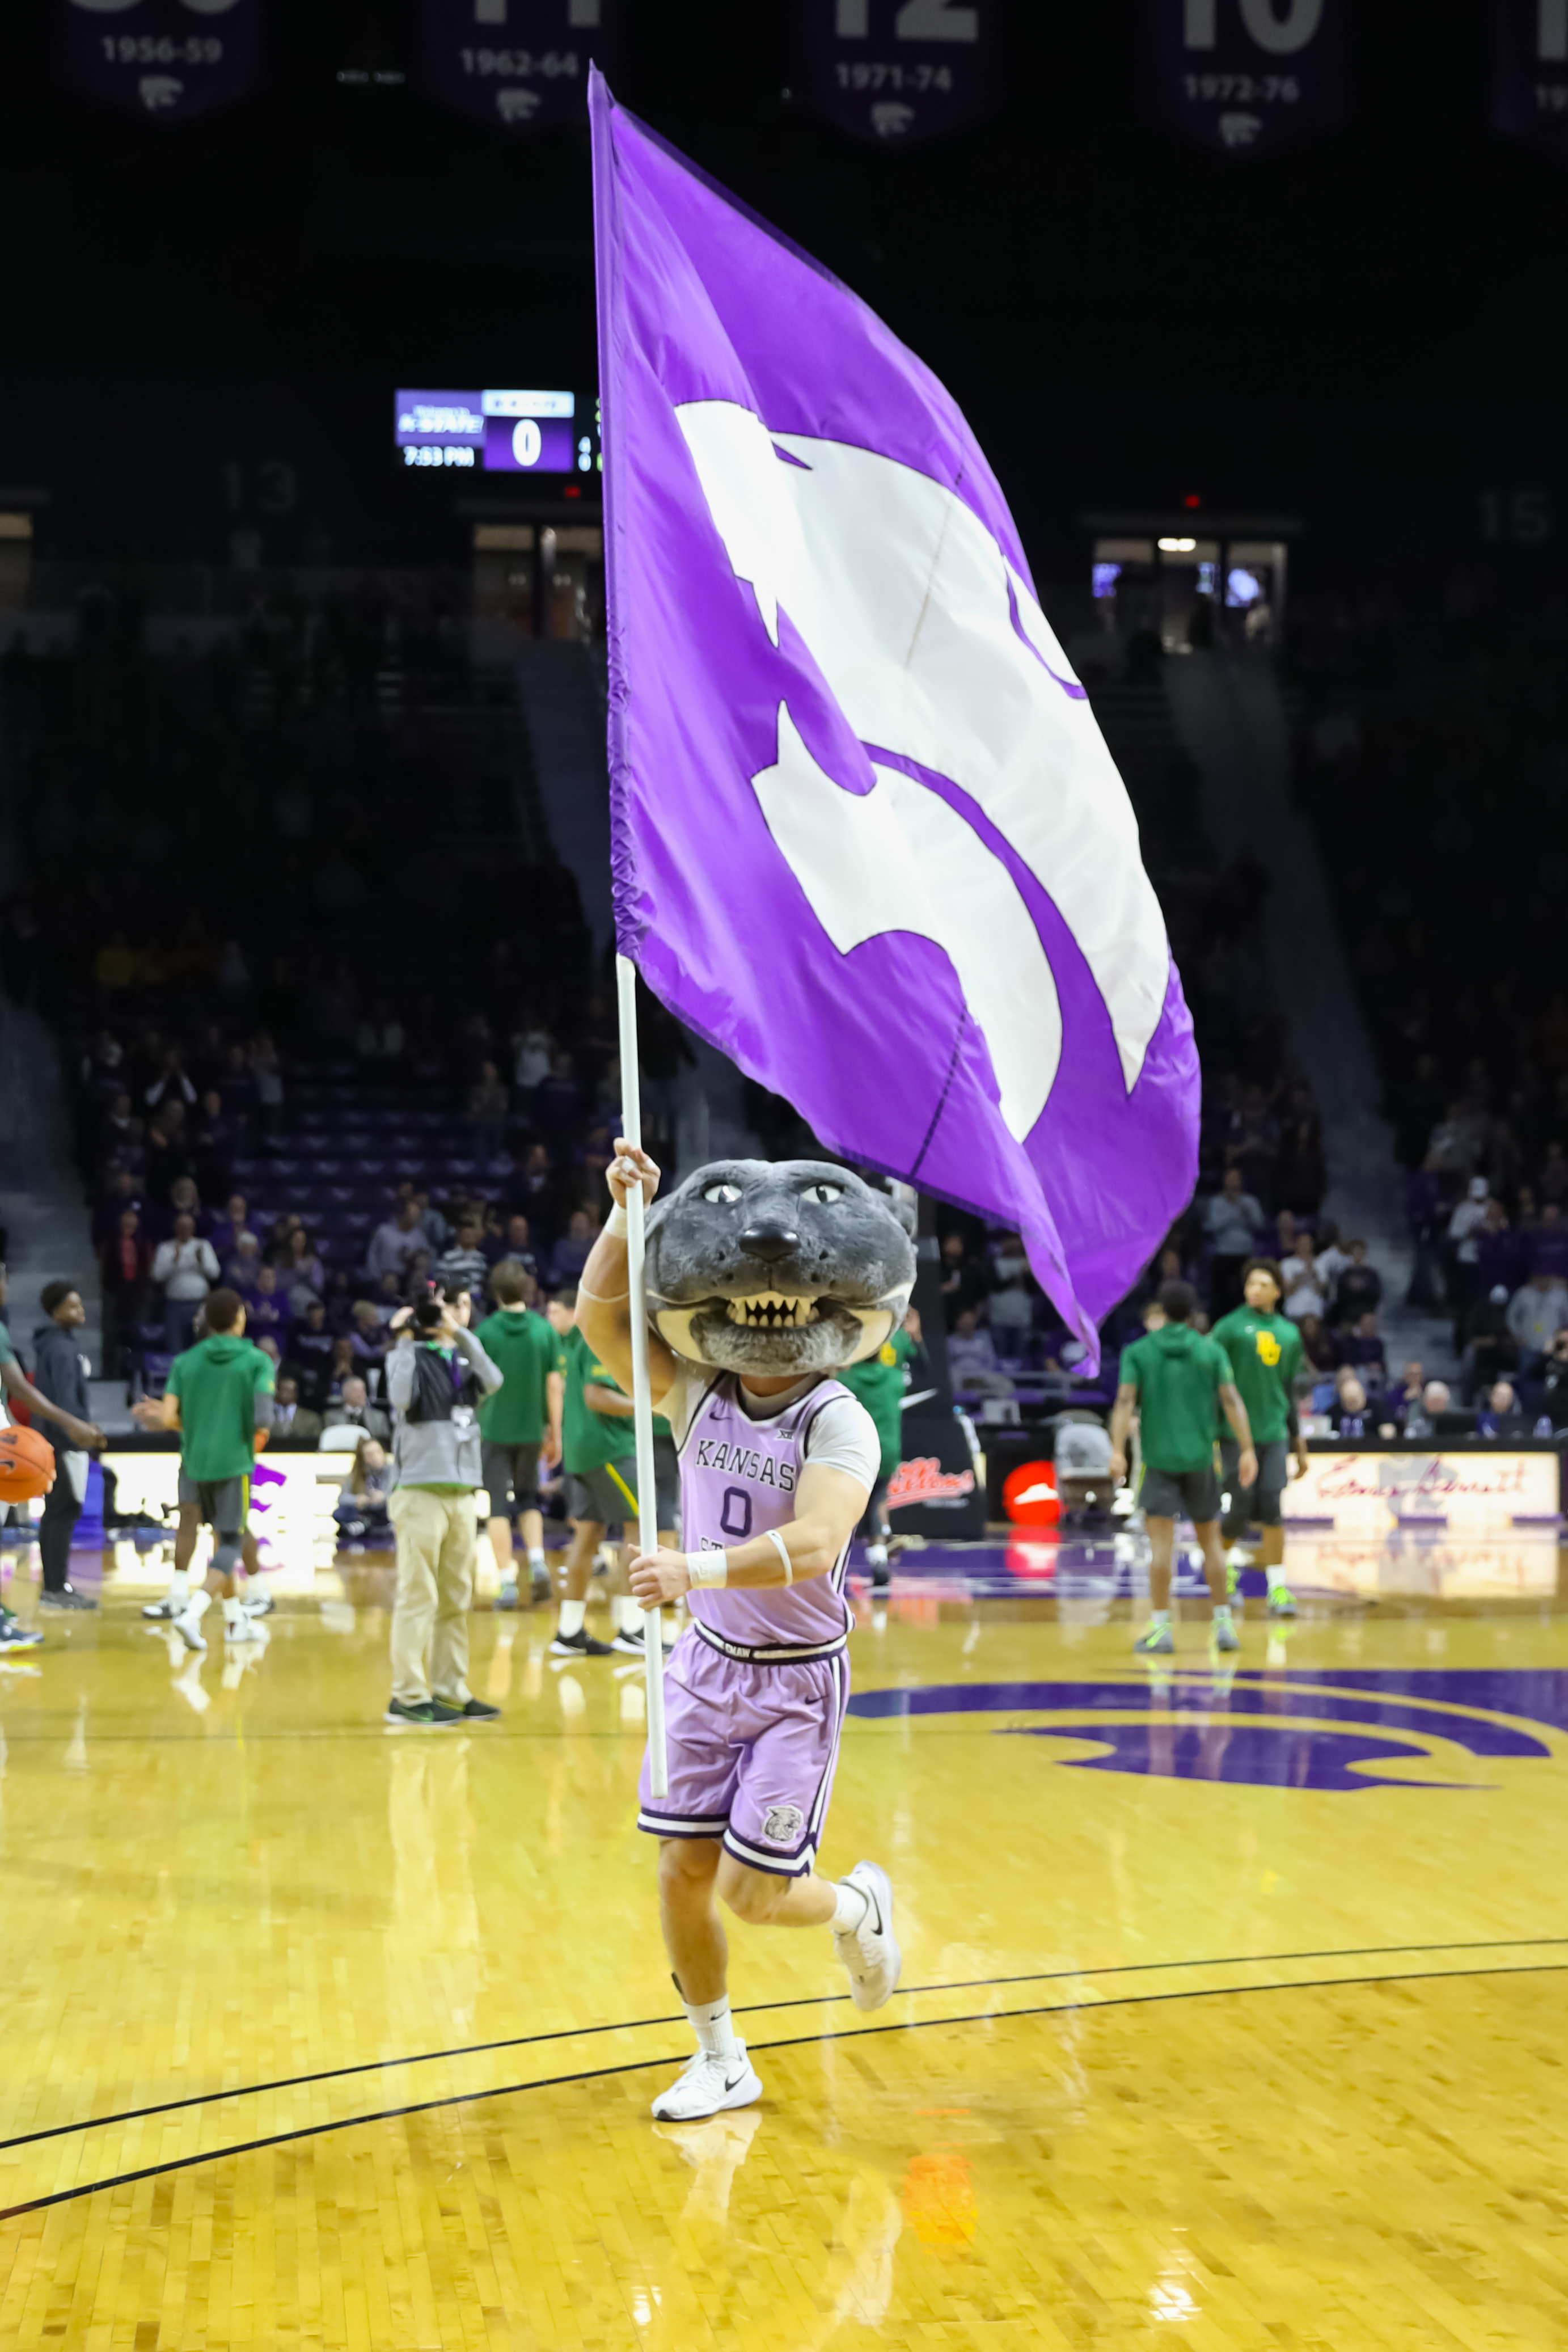 Kansas State Wildcats mascot Willie the Wildcat runs on the court with a giant flag before a Big 12 basketball game between the Baylor Bears and Kansas State Wildcats on February 3, 2020 at Bramlage Coliseum in Manhattan, KS.